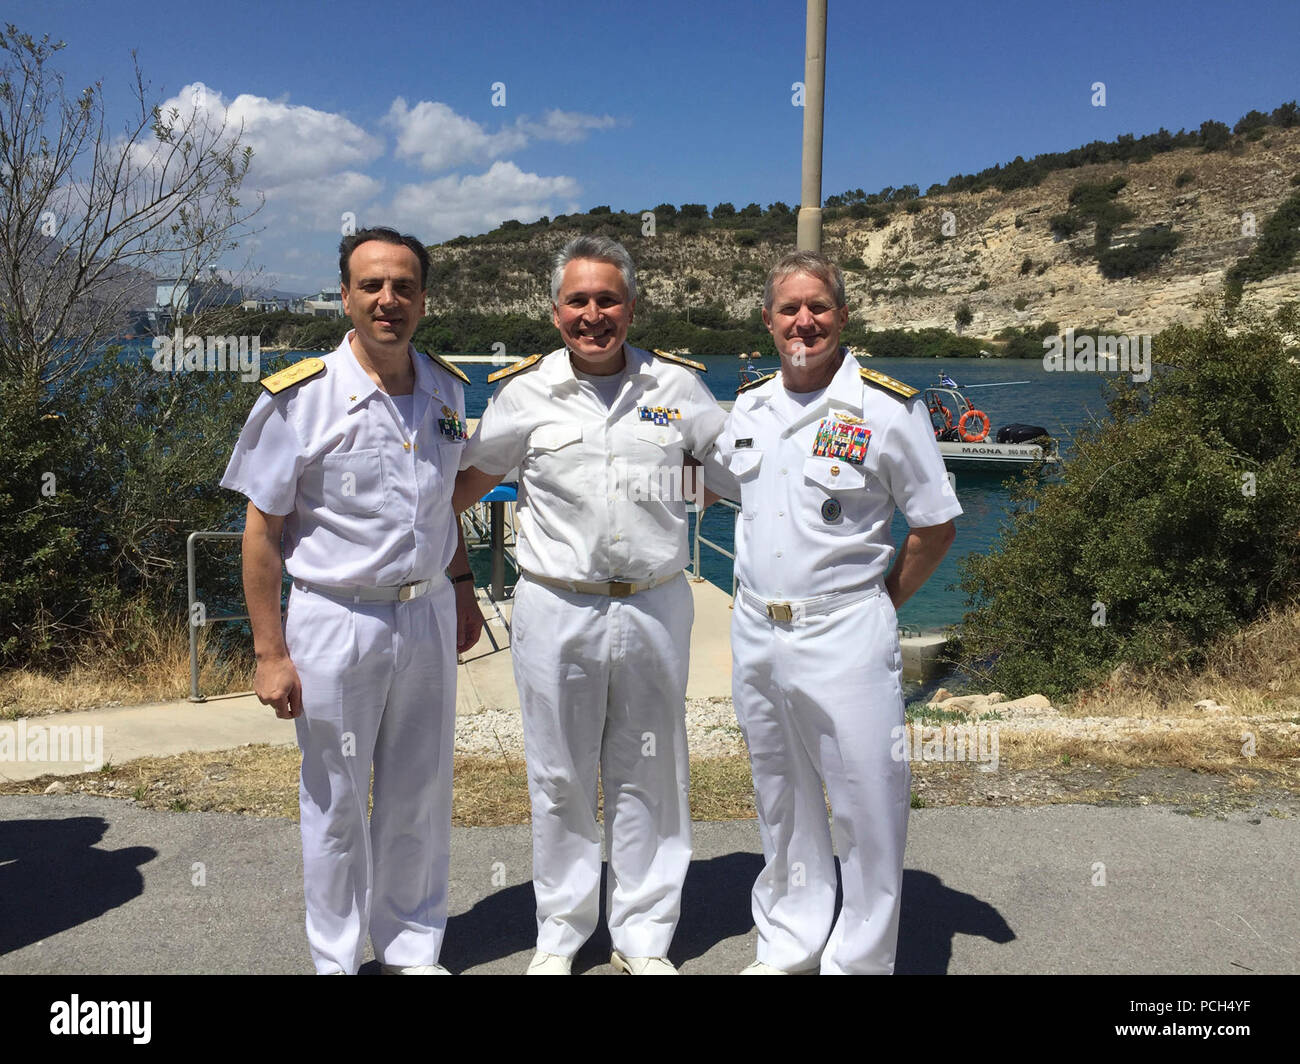 SOUDA BAY, Greece (May 17, 2016)  Rear Adm. Kevin Kovacich, Director of Strategy, Plans, and programs, U.S. Africa Command, and Italian Navy Rear Adm. Alberto Maffeis, Commander Patrol Forces Italy joined with Hellenic Navy Commodore Georgios Tsogkas, Commandant of NATO Maritime Interdiction Operational Training Center for a tour of Naval Support Activity Souda Bay as part of exercise Phoenix Express 2016 opening ceremony May 17. Phoenix Express 2016, sponsored and facilitated by U.S Africa Command, is designed to improve regional cooperation, increase maritime domain awareness, information-sh Stock Photo